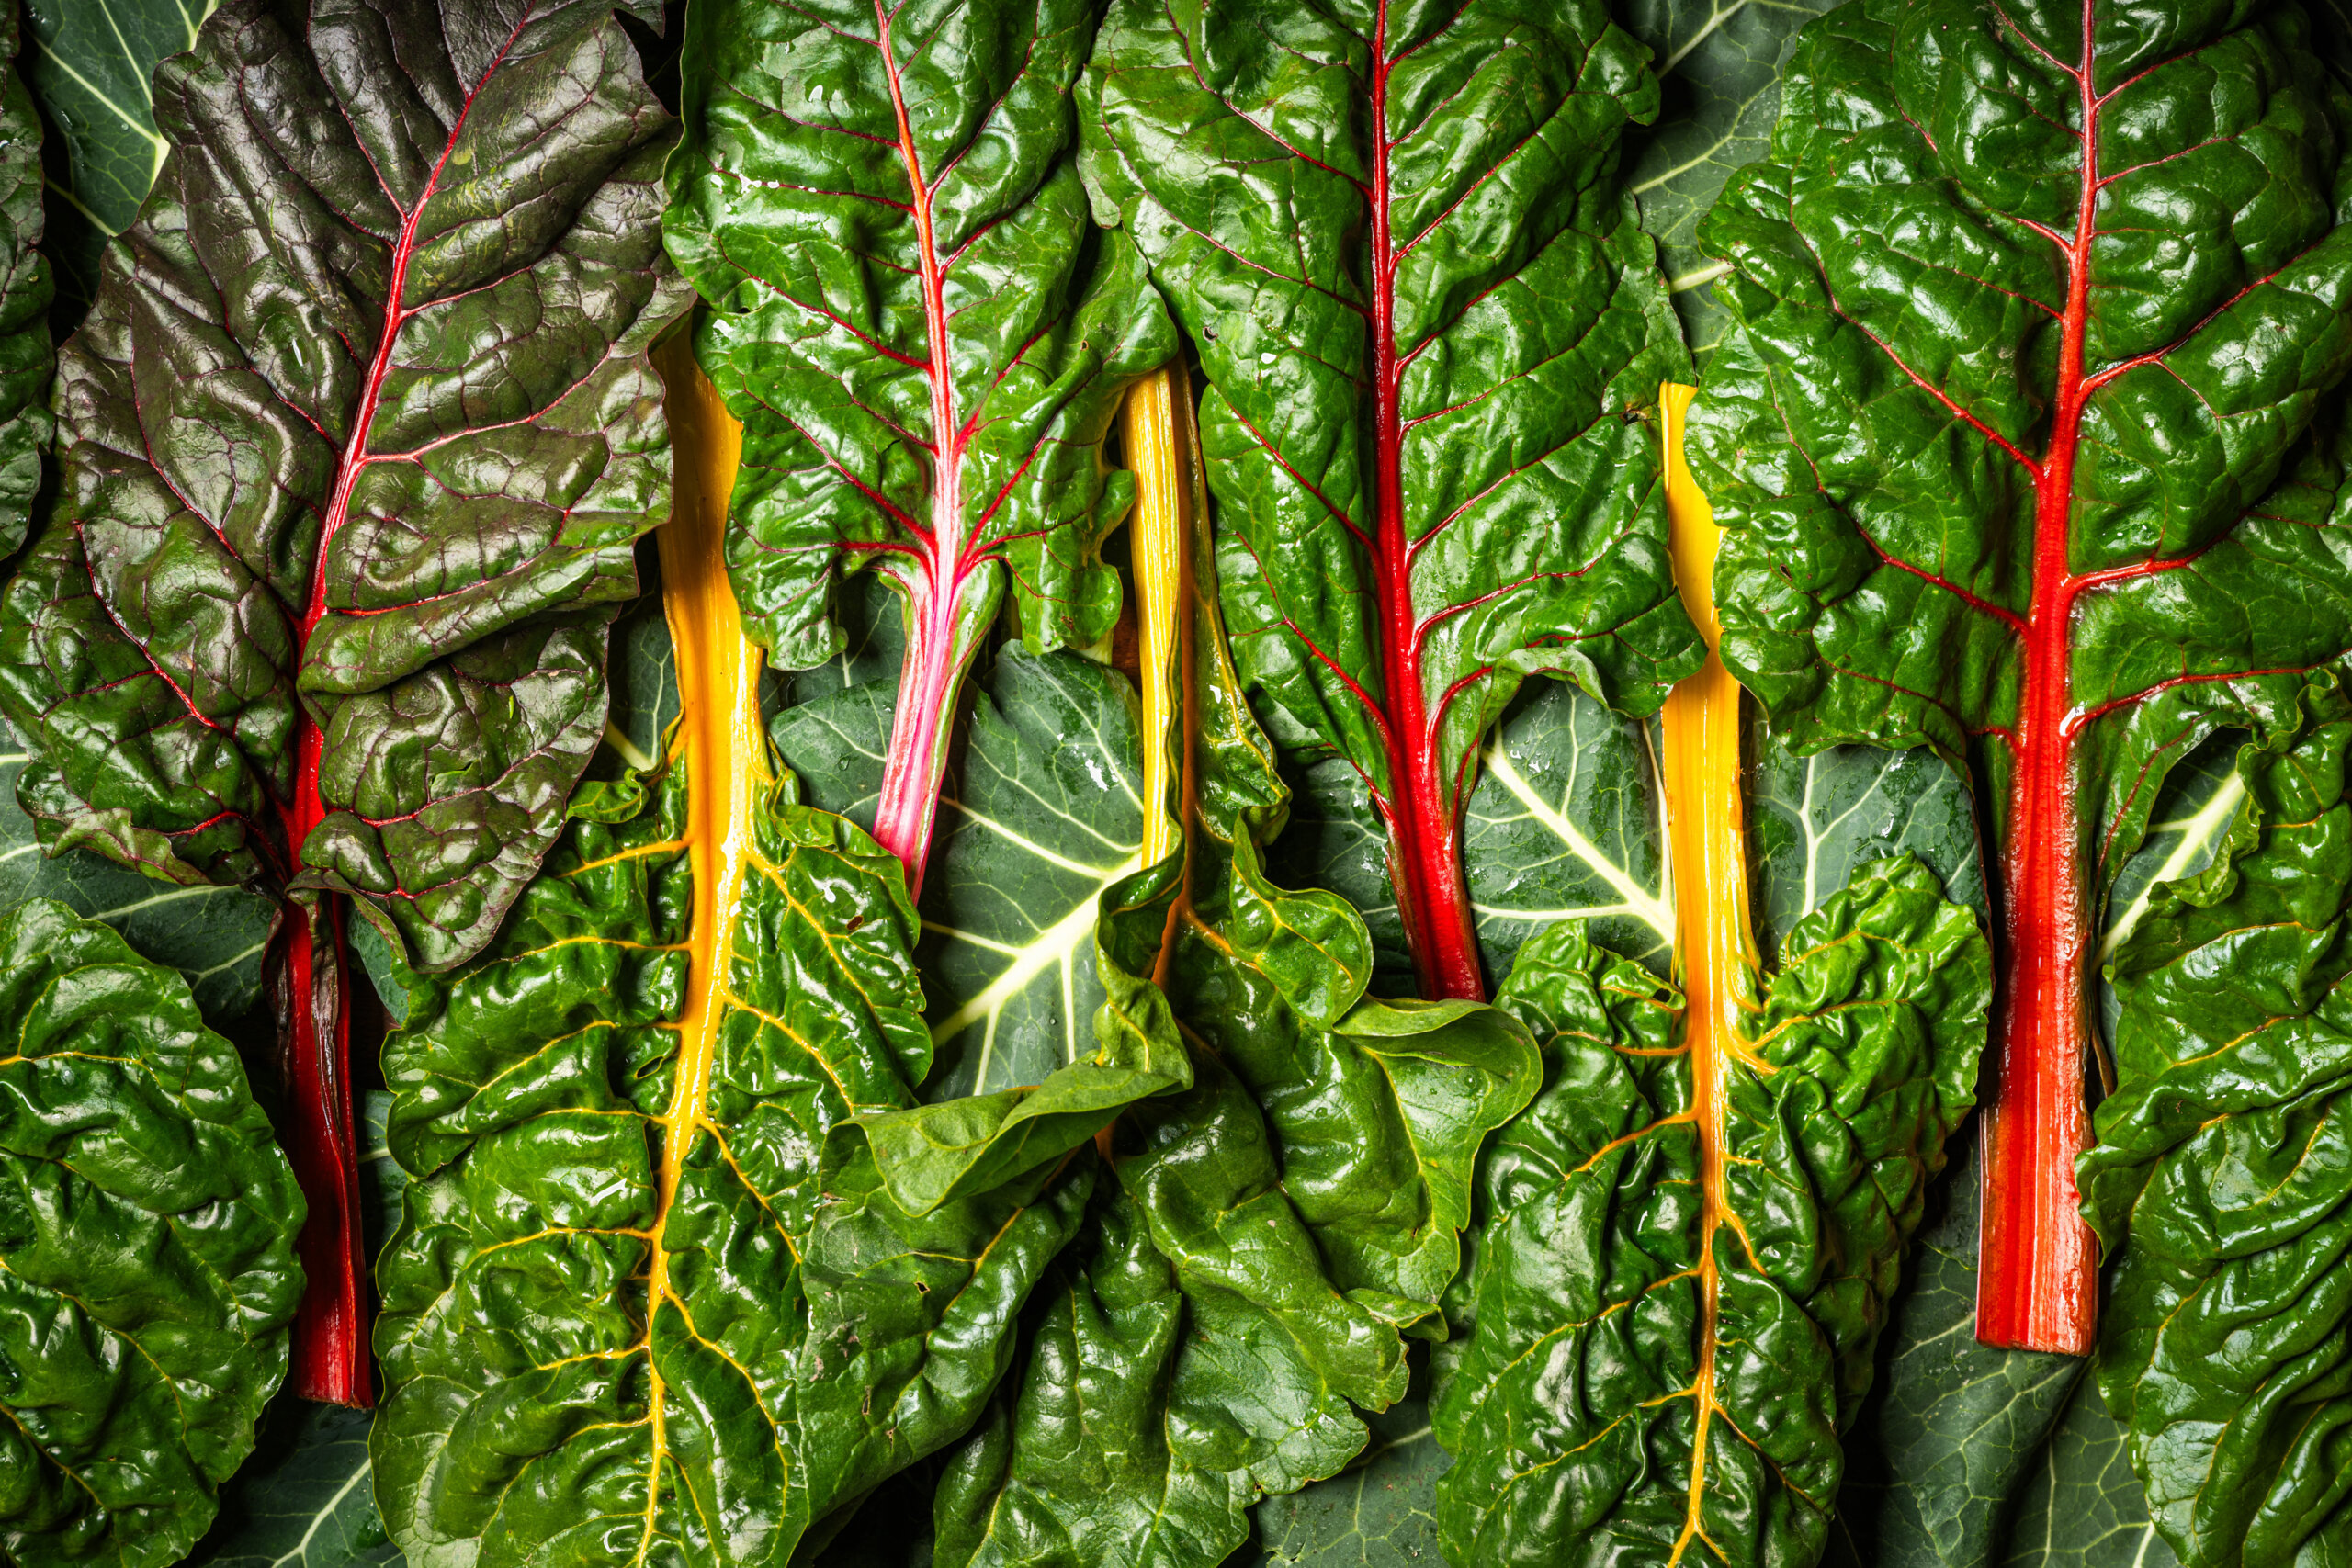 A top-down portrait of rainbow chart and collards from Vessey Farms in Southern California